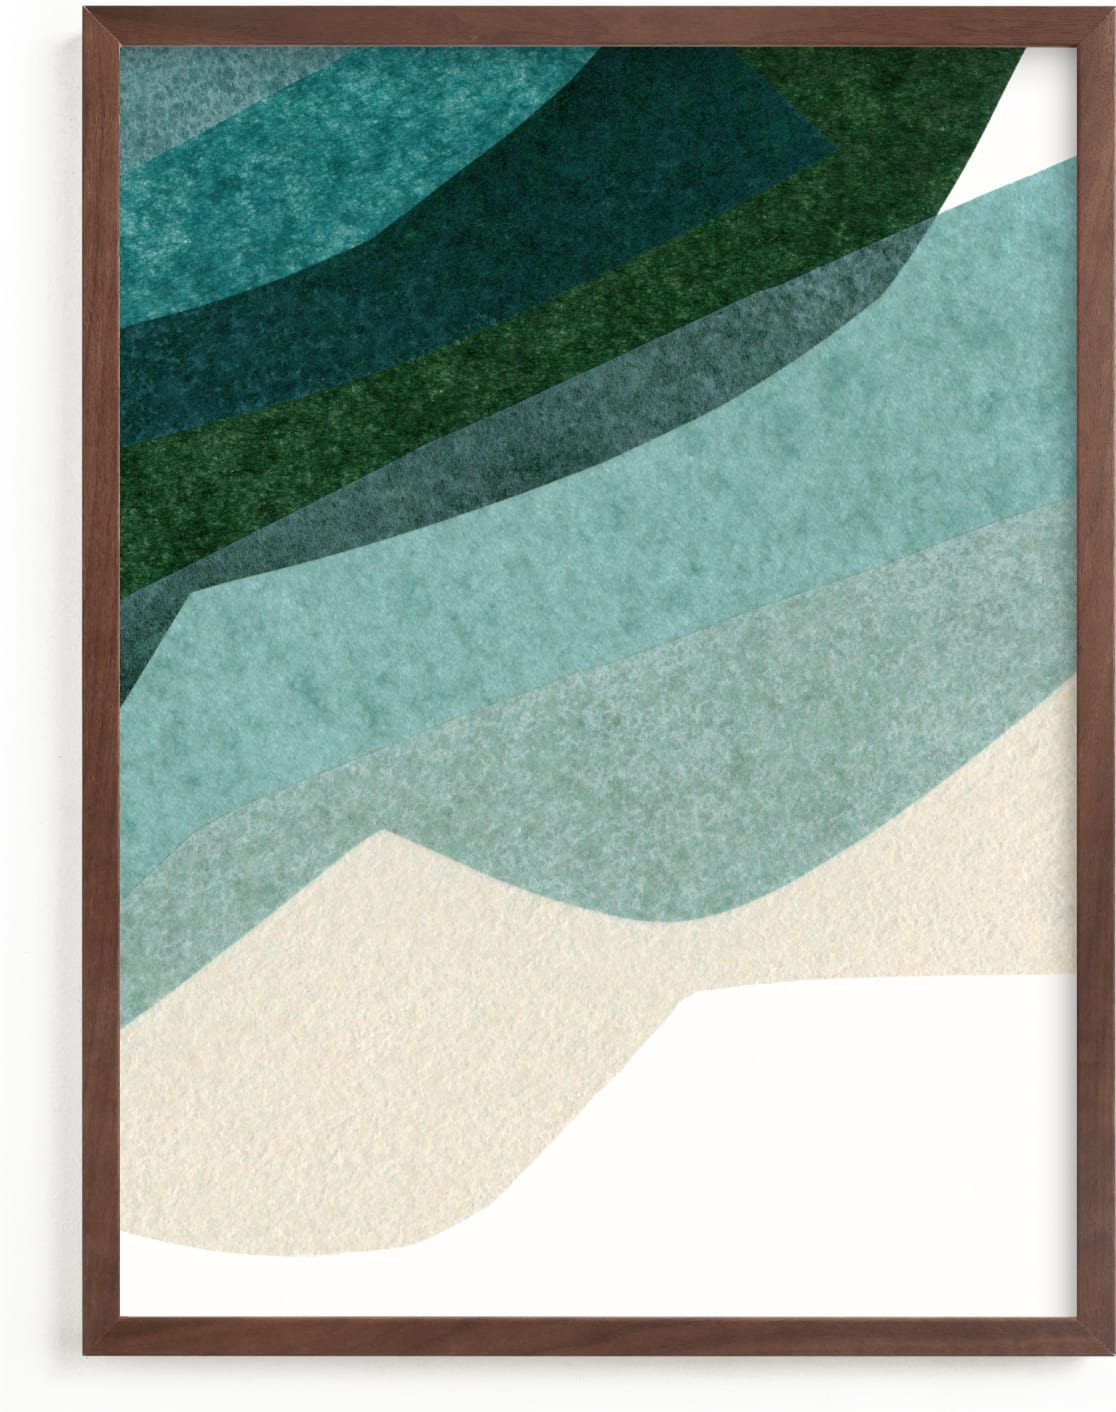 This is a blue, ivory, green art by Carrie Moradi called Rippling Fields II.